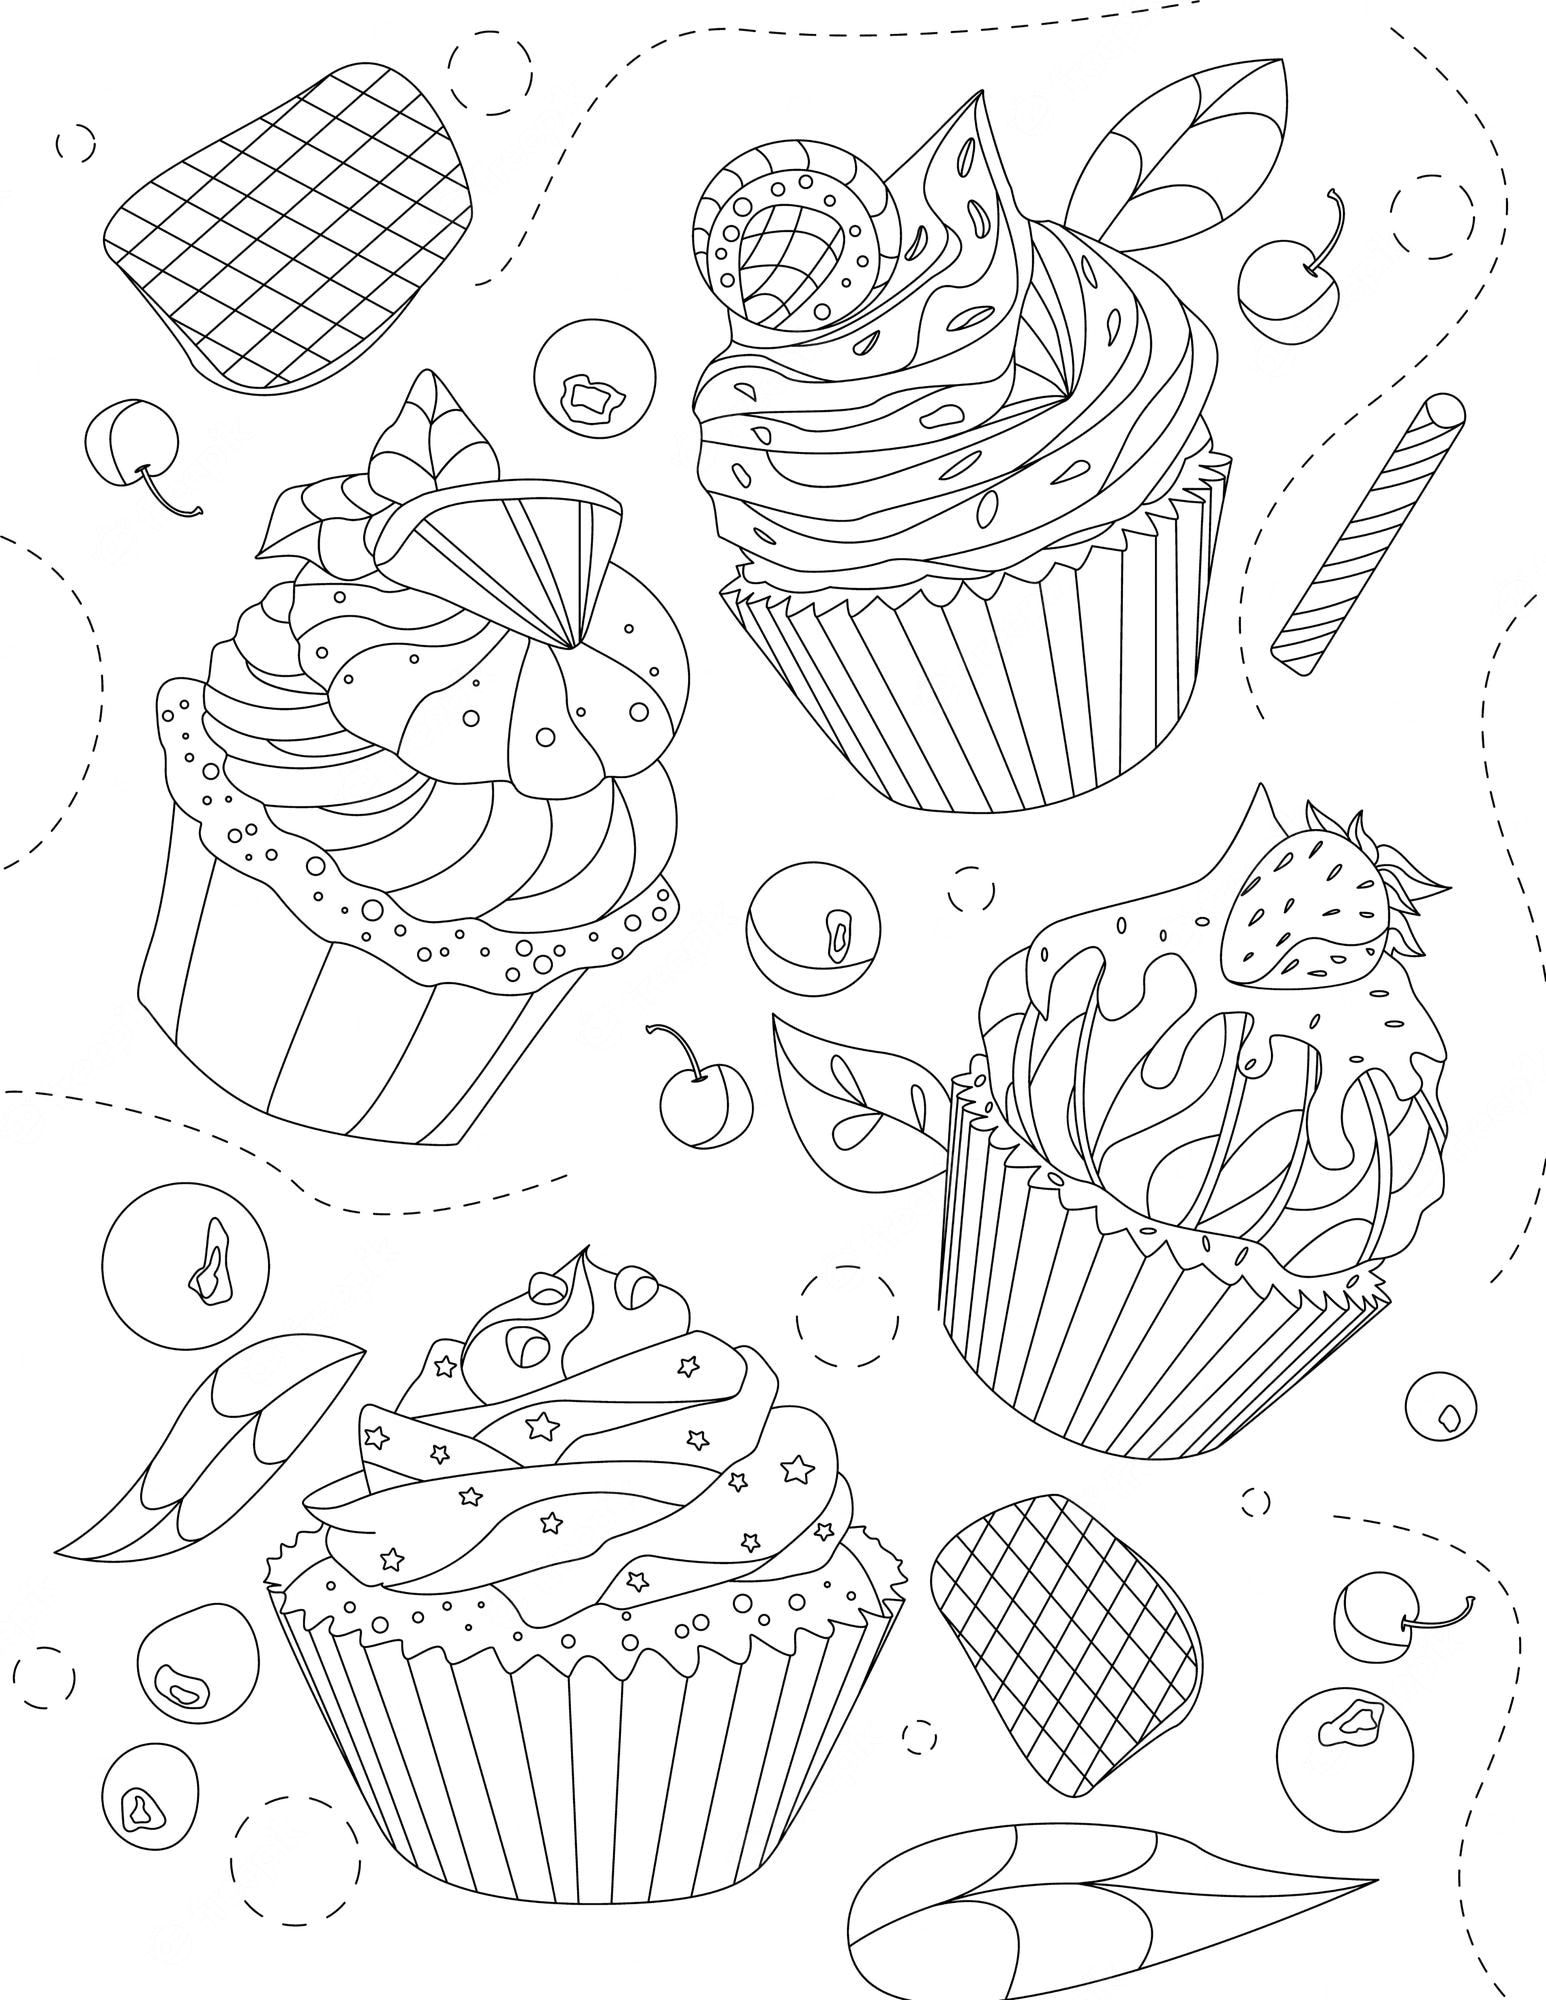 muffins for dessert coloring page